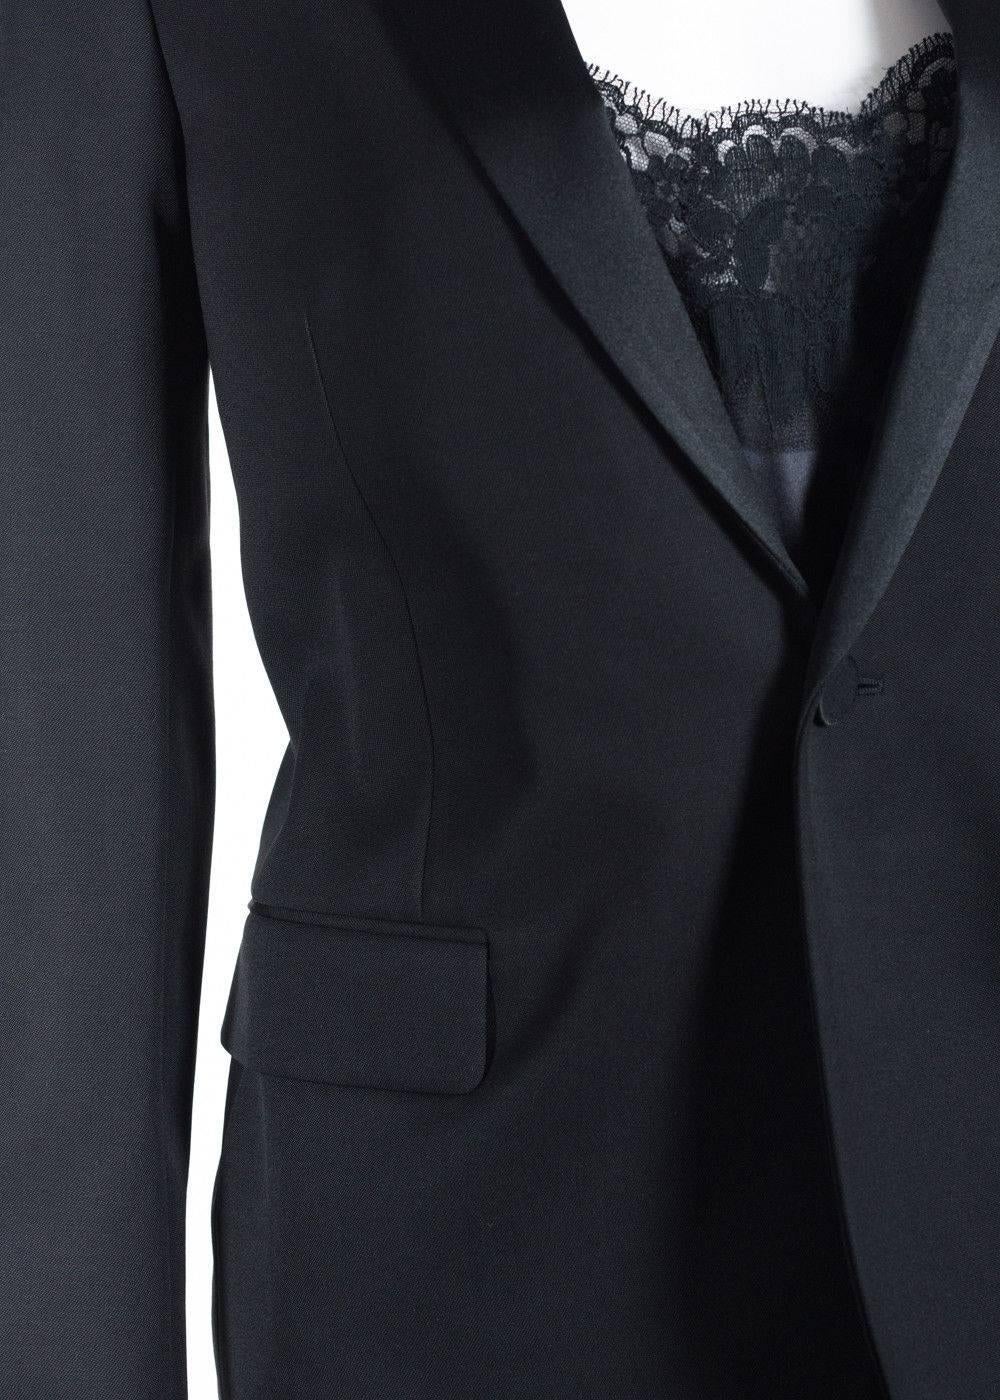 Brand New With Tags
Retails Online and In-stores for $3490
Size EUR 40 / US 8 Fits True to Size


Top your ensemble off with the unforgettable Saint Laurent Tuxedo Jacket. This amazingly tailored jacket is made off rich wool crepe and silk for the